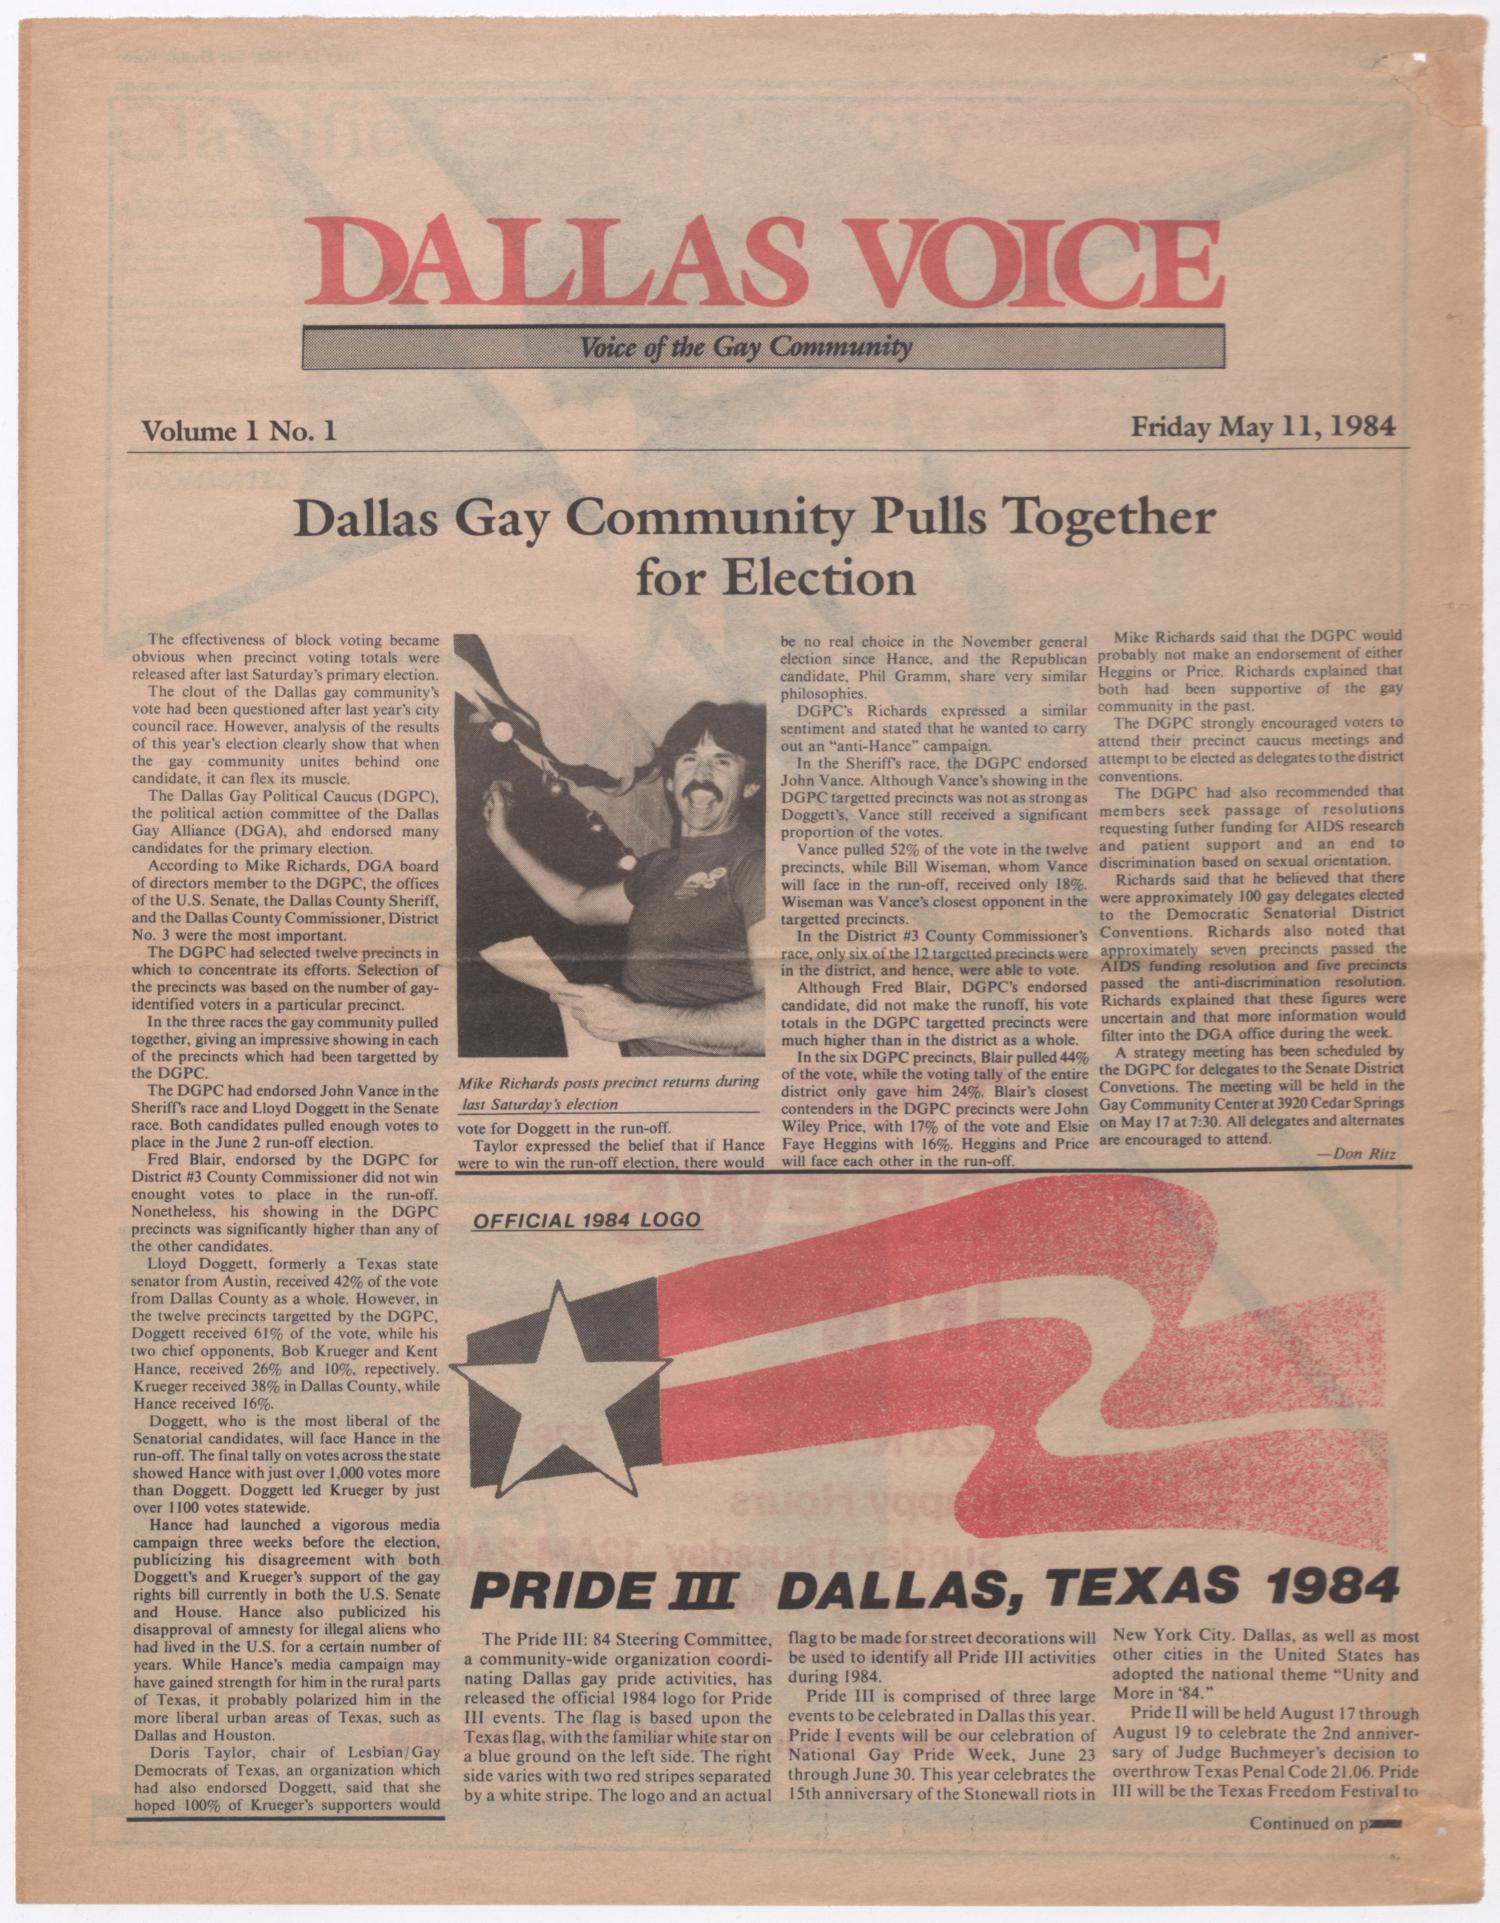 [Pages from Dallas Voice, Volume 1, Number 1]
                                                
                                                    1
                                                